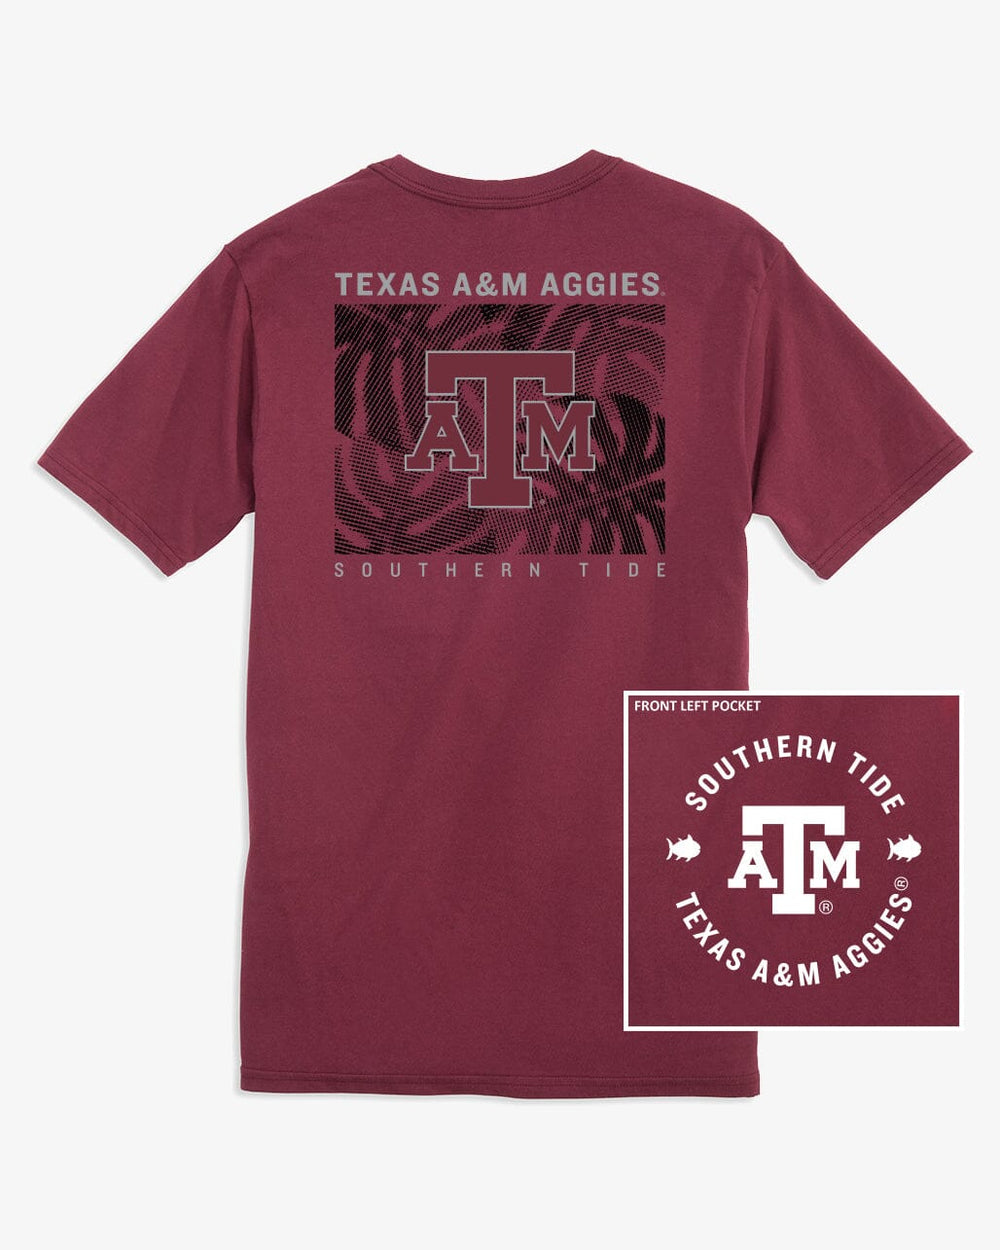 The front view of the Texas A&M Aggies Halftone Monstera T-Shirt by Southern Tide - Chianti